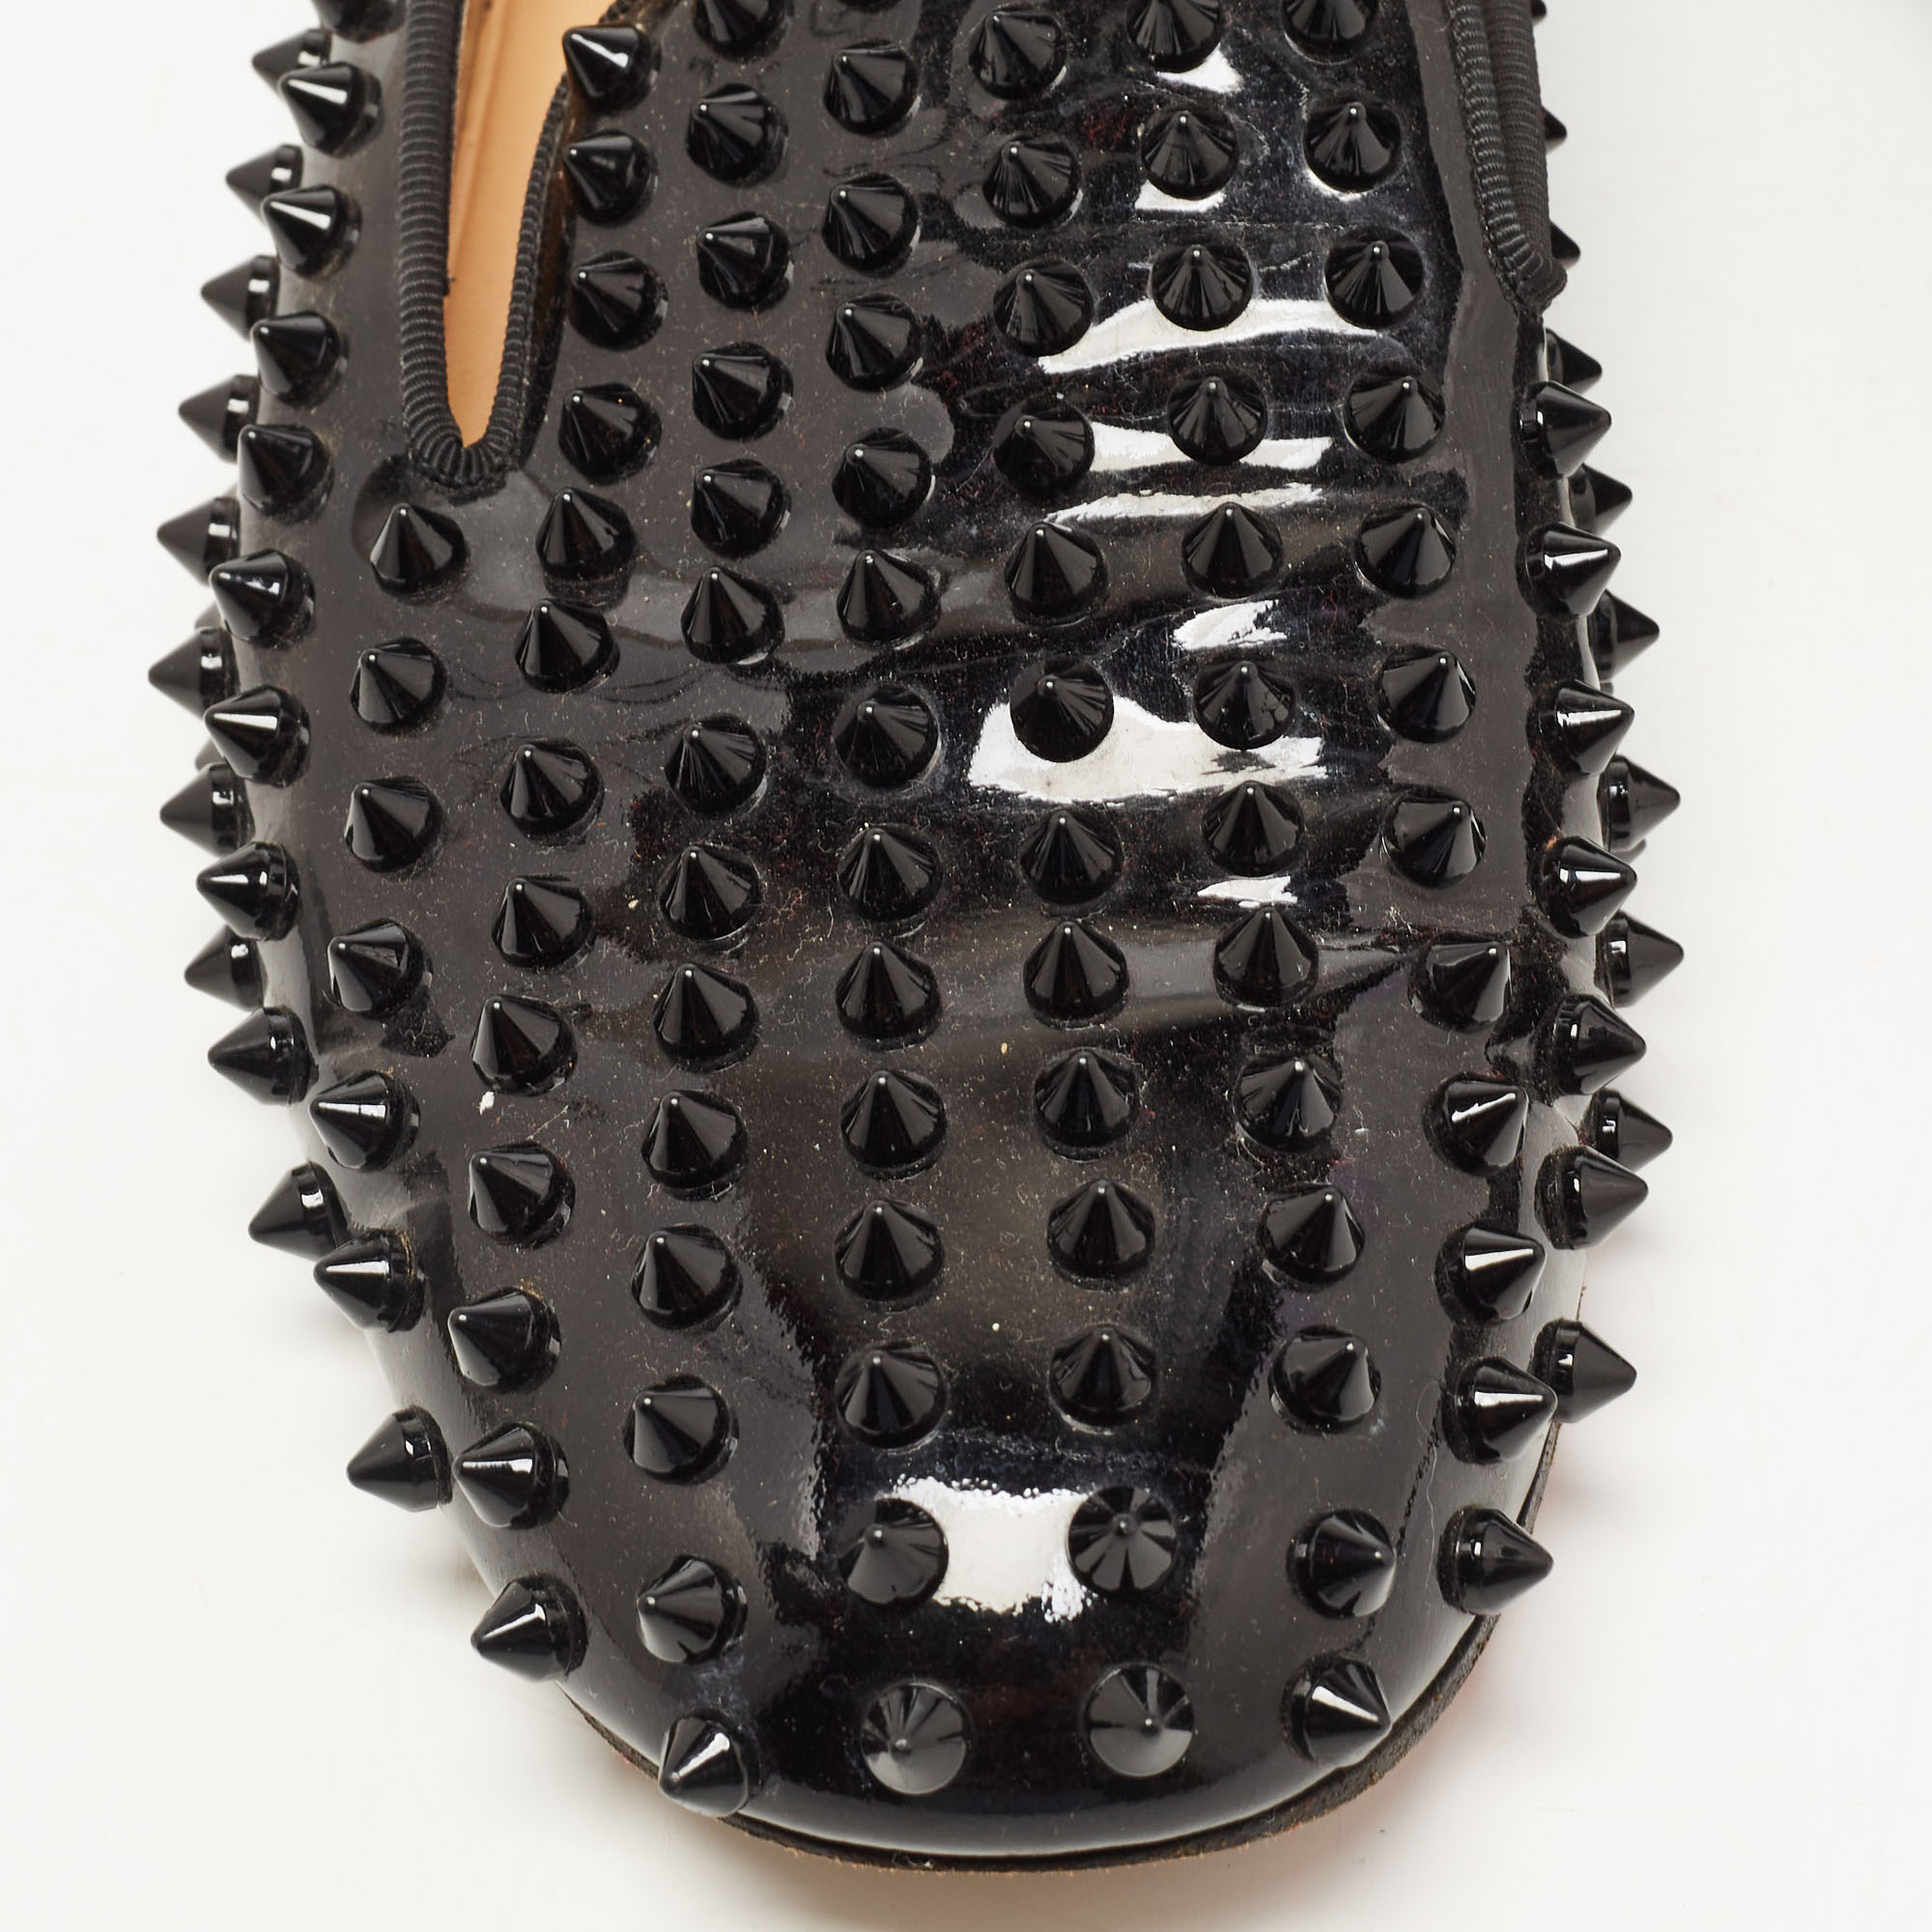 Christian Louboutin Black Patent Leather Dandelion Spikes Smoking Slippers Size 38